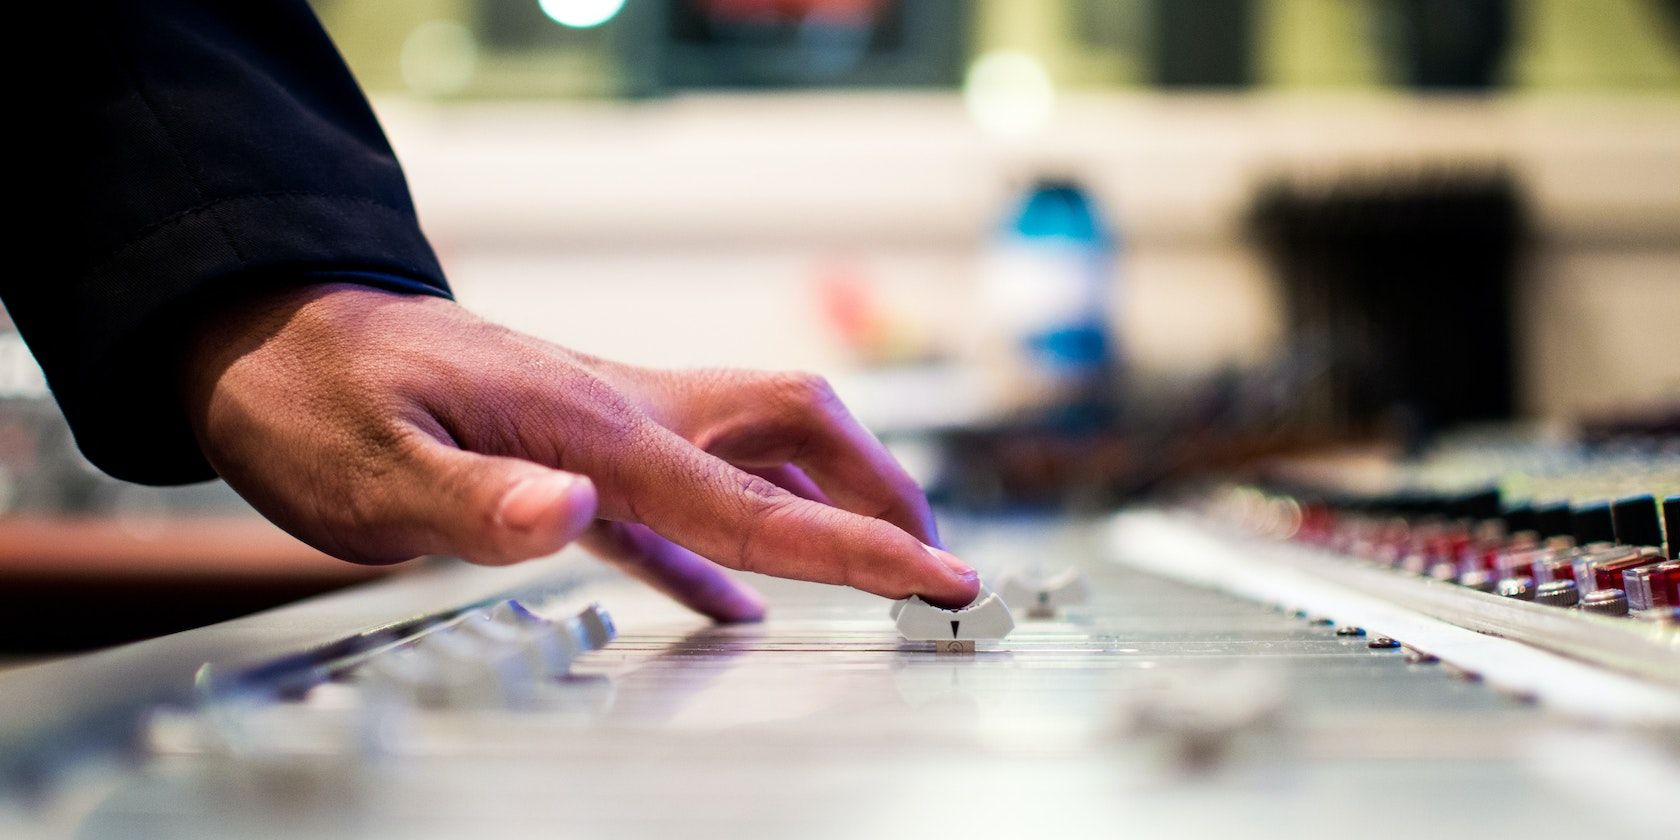 A close up photo of a hand pushing a fader on an audio mixer console